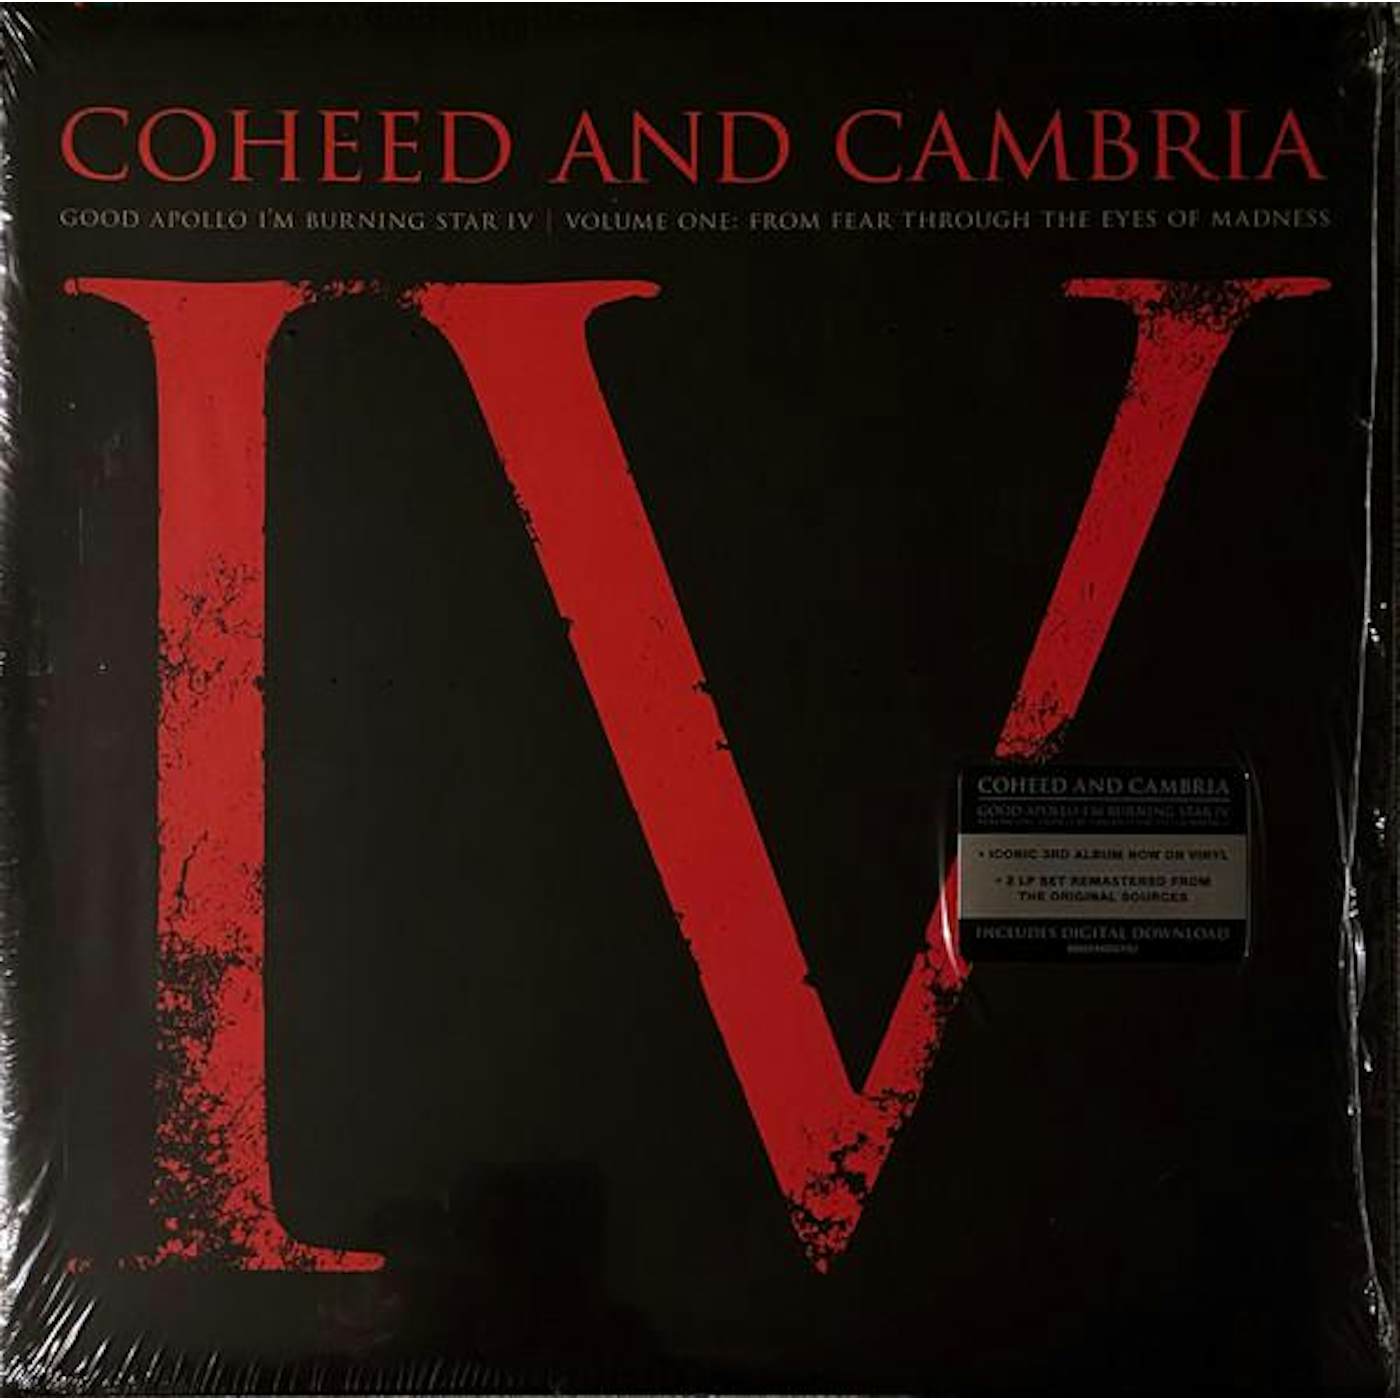 Coheed and Cambria GOOD APOLLO I'M BURNING STAR IV VOL.1:  FROM FEAR THROUGH THE EYES OF MADNESS (2LP/150G/DLCARD) Vinyl Record